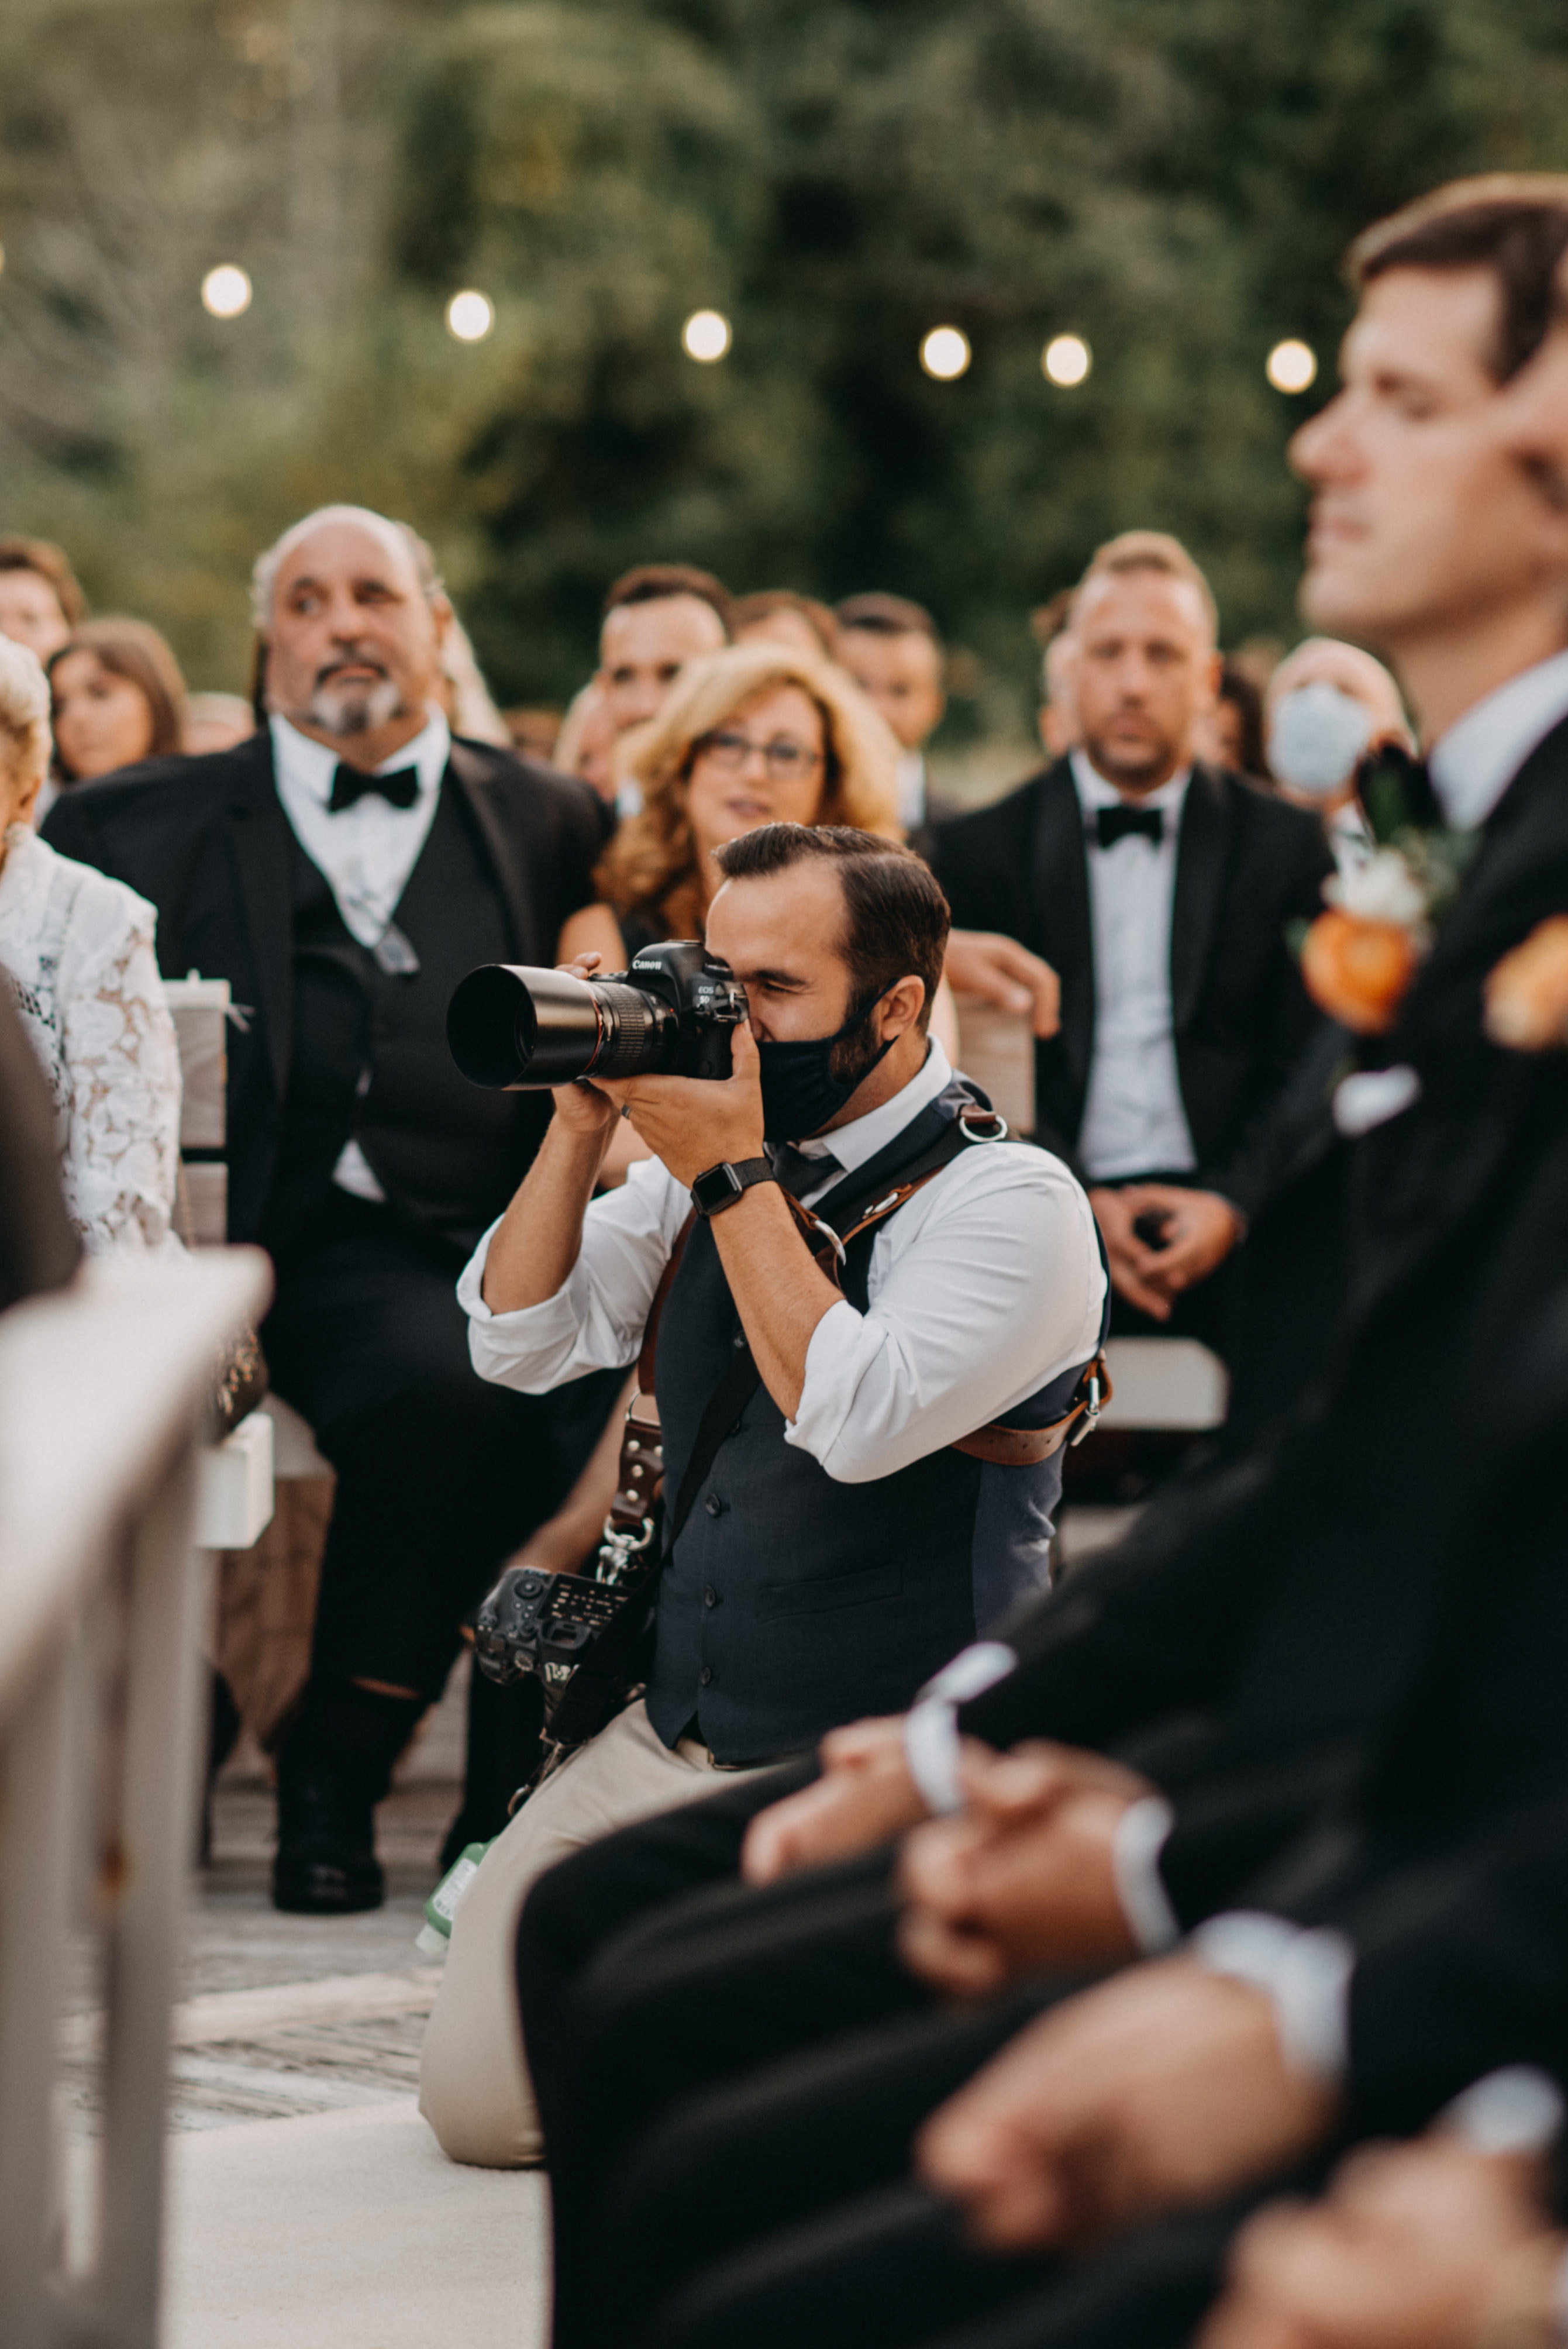 a wedding photographer with two cameras kneels down to take a picture surrounded by guests